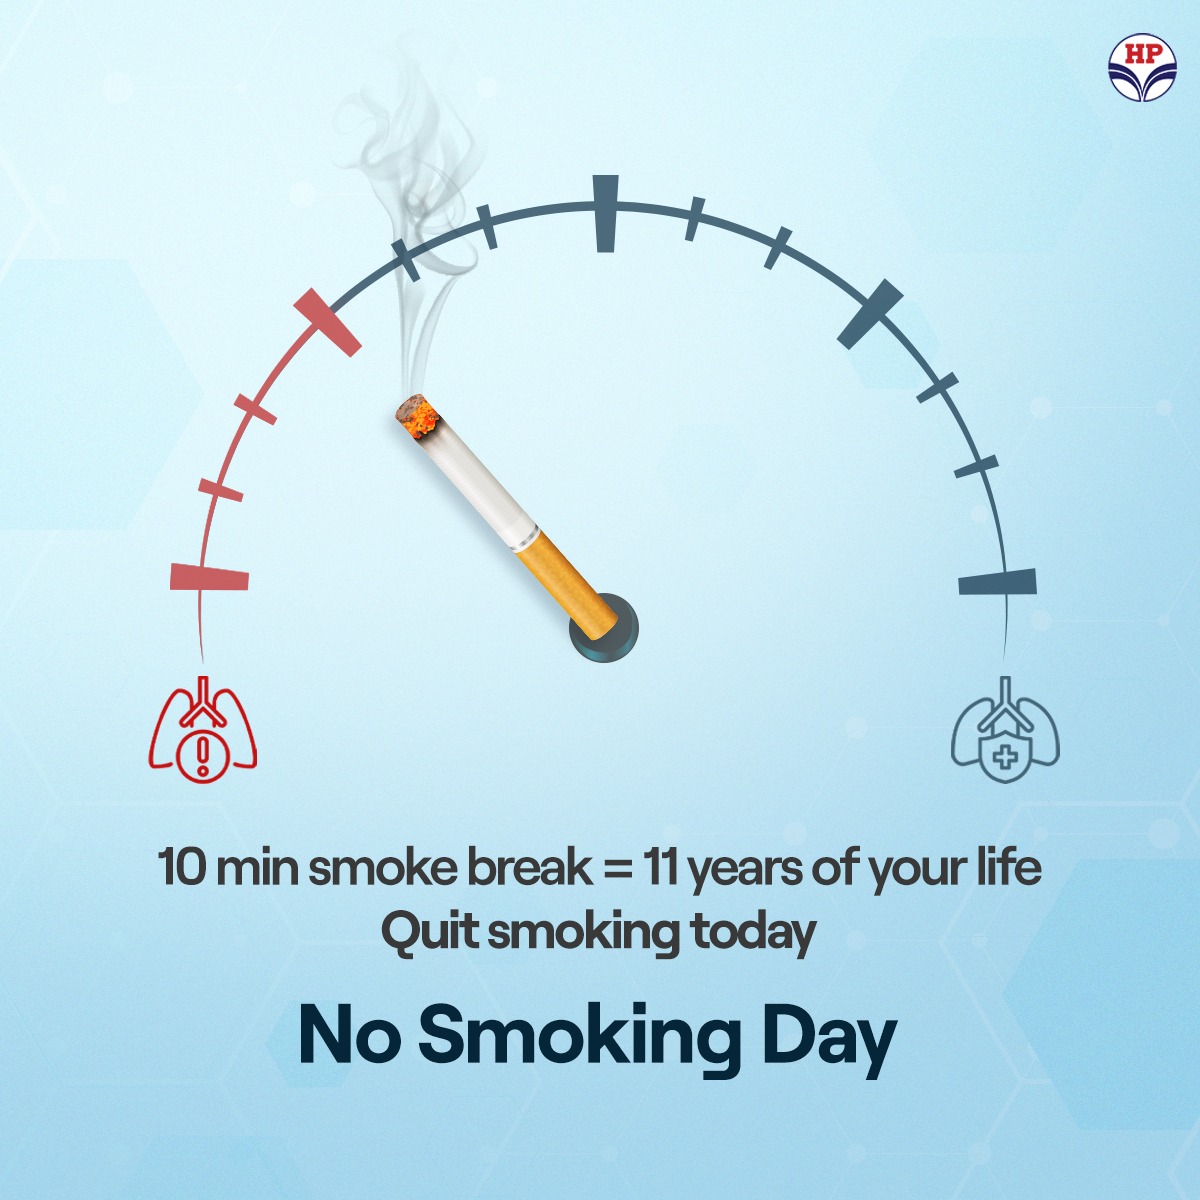 Every puff is a choice, every exhale a chance to reclaim health. You can quit and make a comeback; strength lies in every attempt. Choose wisely for your health. HP Retail supports your journey to a smoke-free future.

#NoSmokingDay #HPCL #HPRetail #MeraHPPump @HPCL